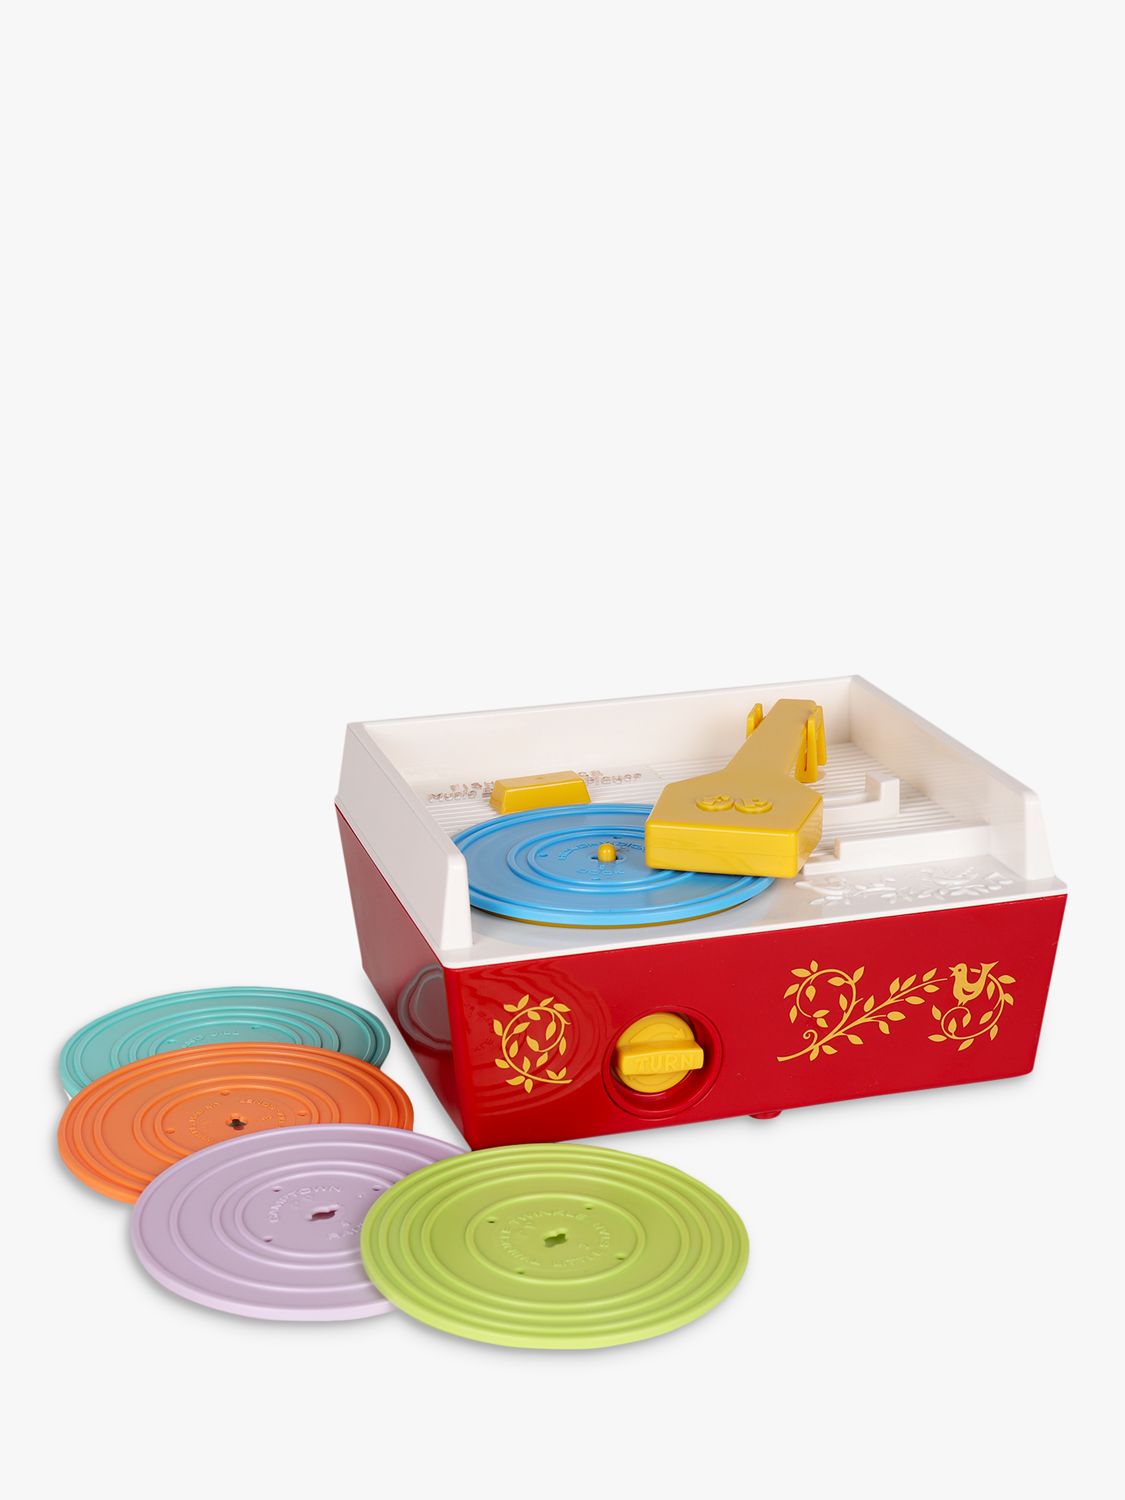 record player fisher price